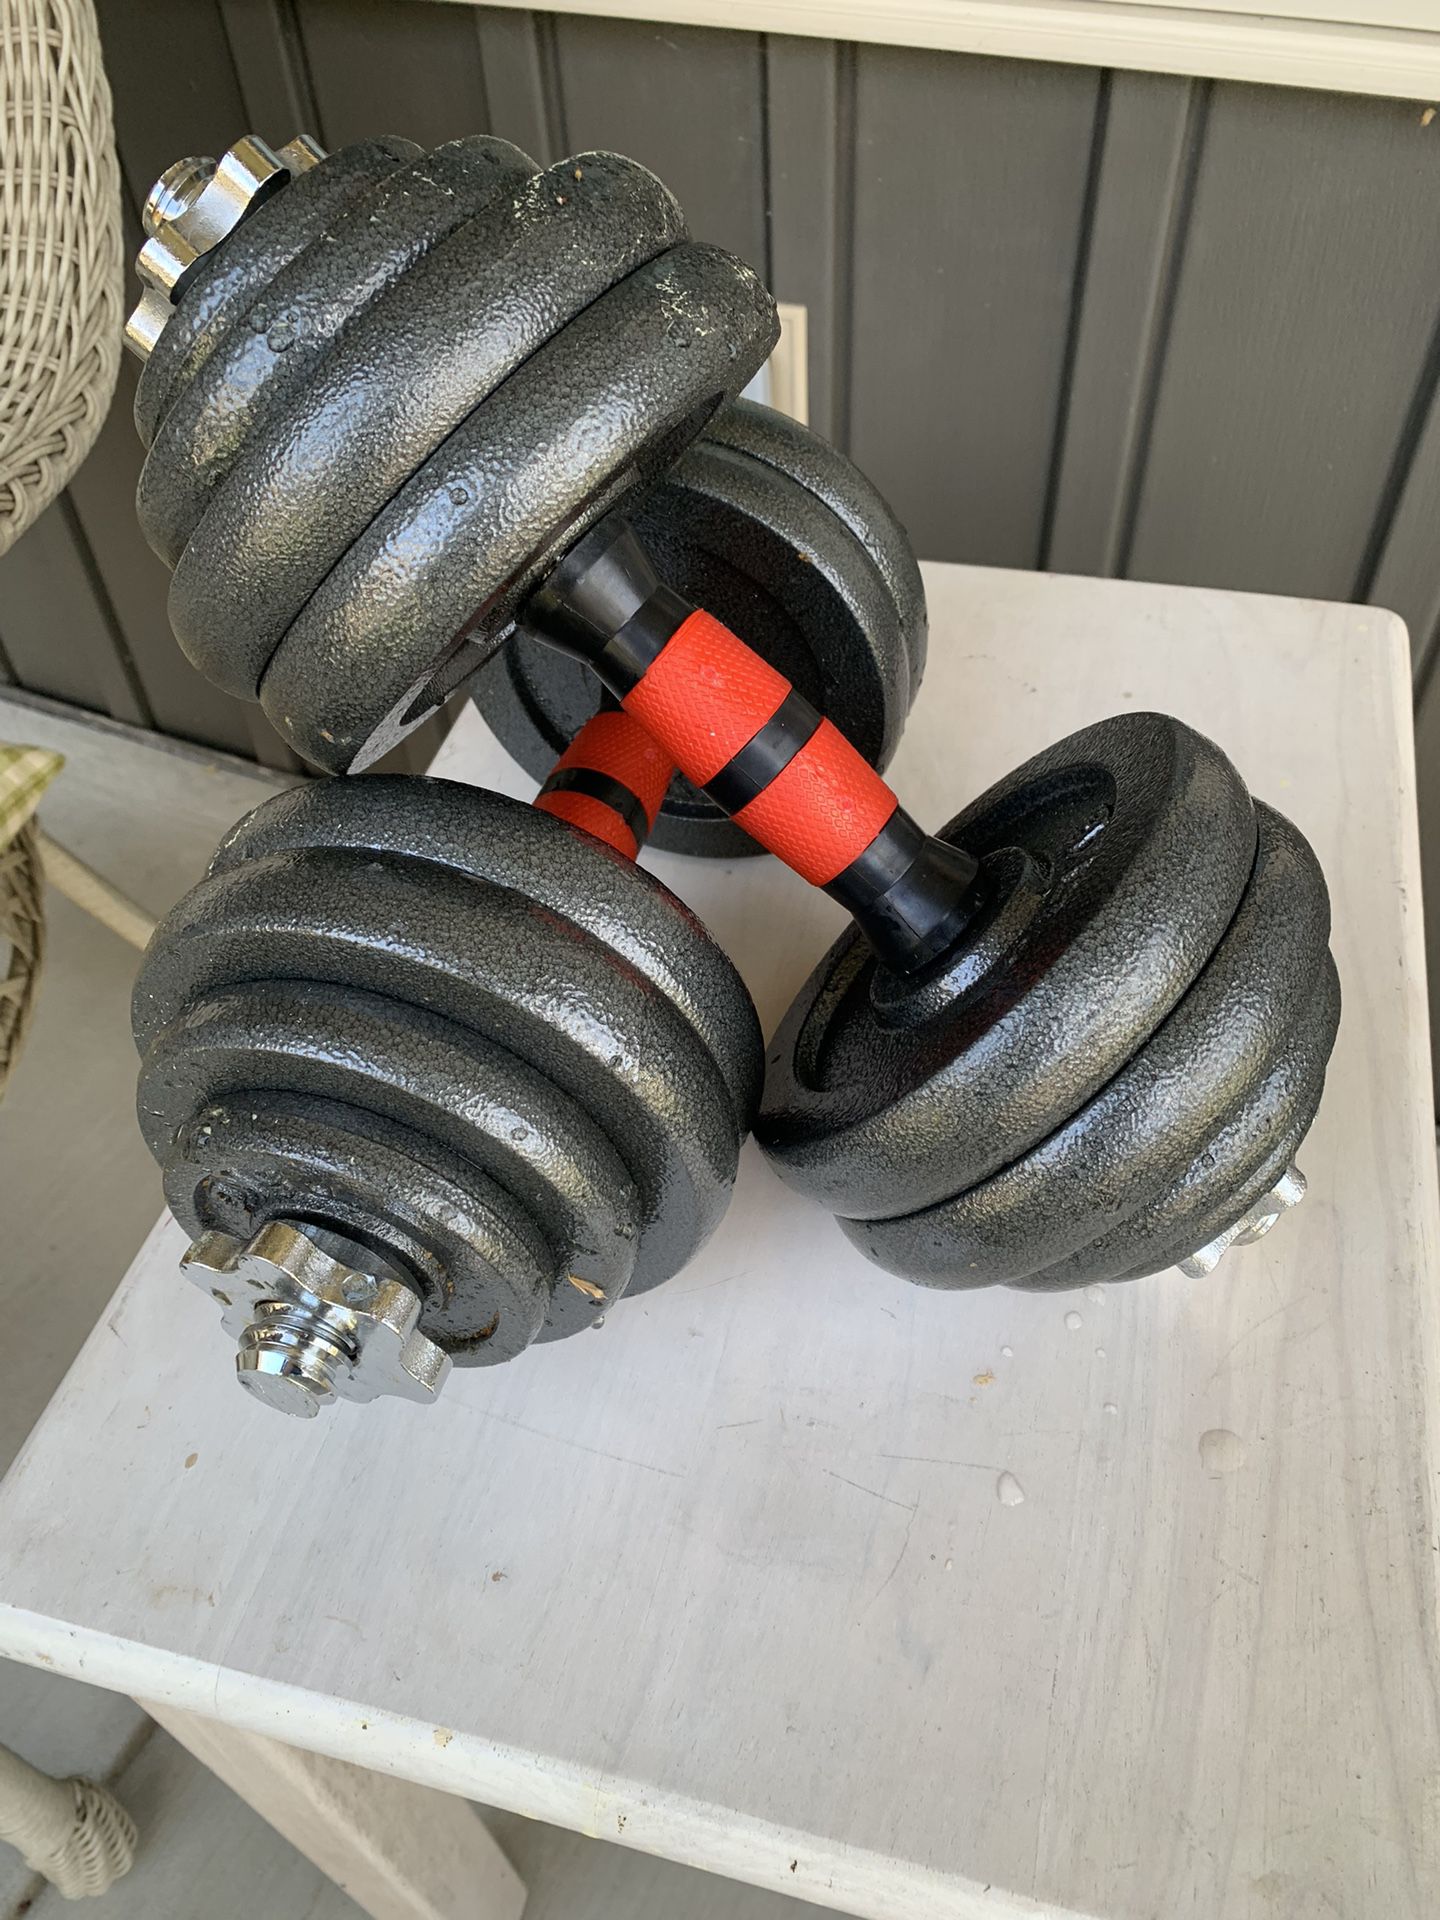 Adjustable Dumbbell Weights - 32 Lbs Each. Total 64 